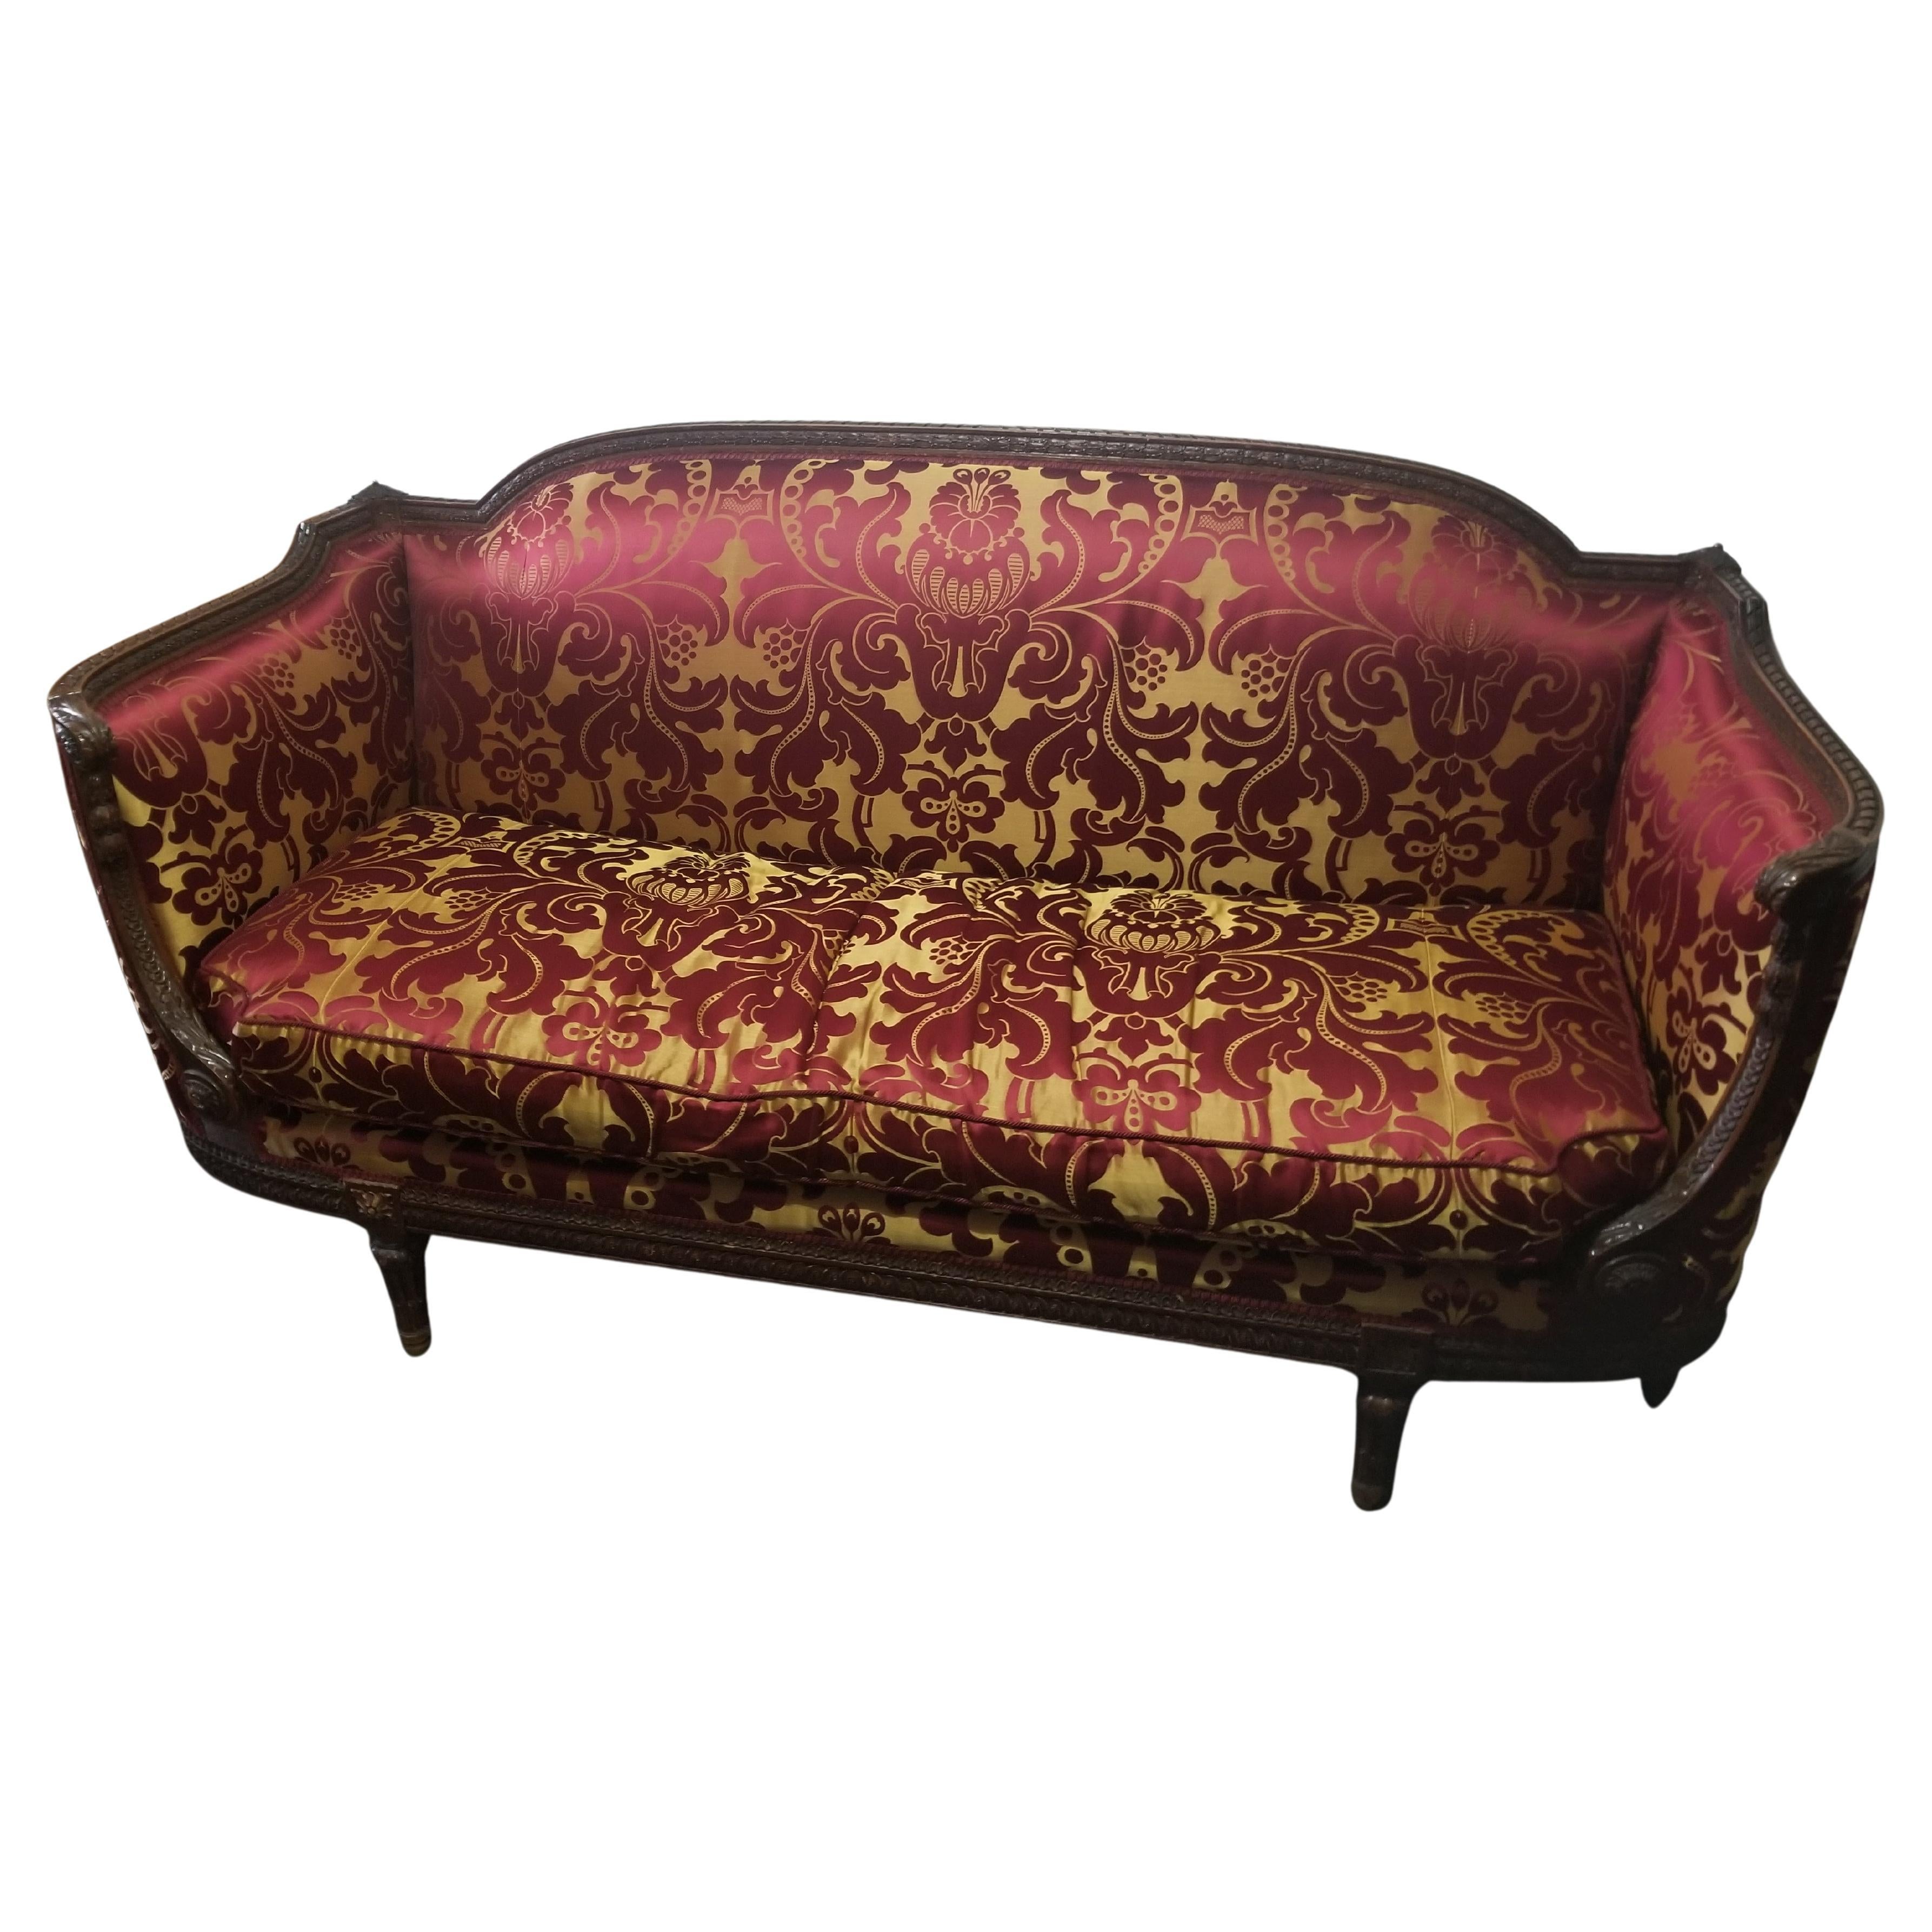 Antique French Louis XVI Style Carbed Walnut Frame Sofa, circa 1860